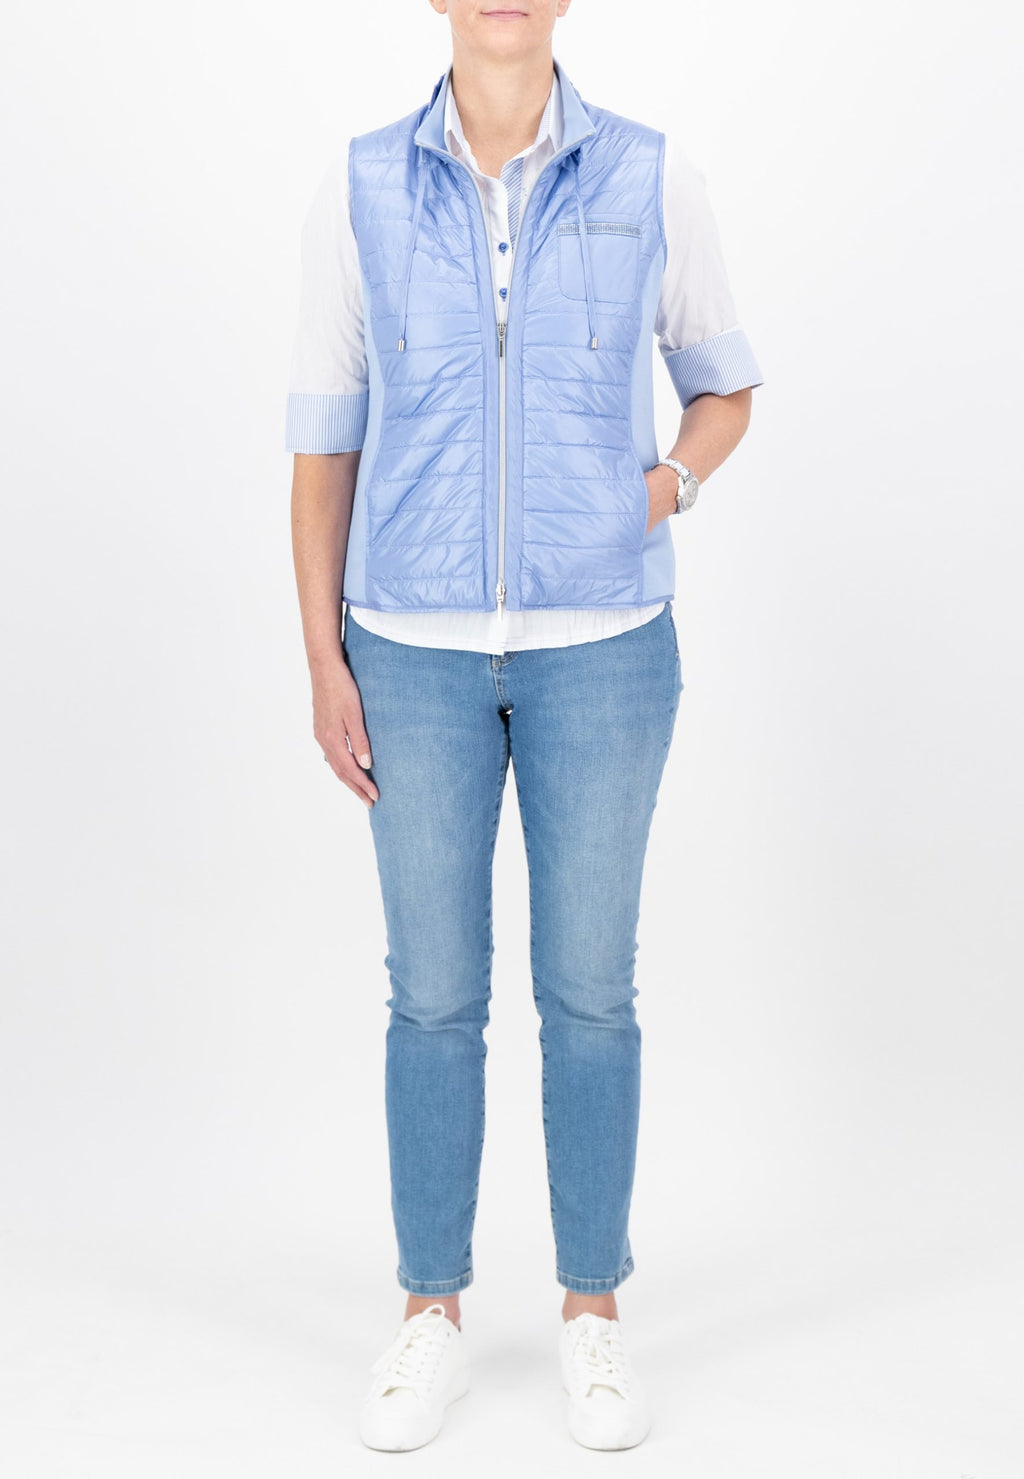 Just White short quilted gilet in powder blue, product code J4120